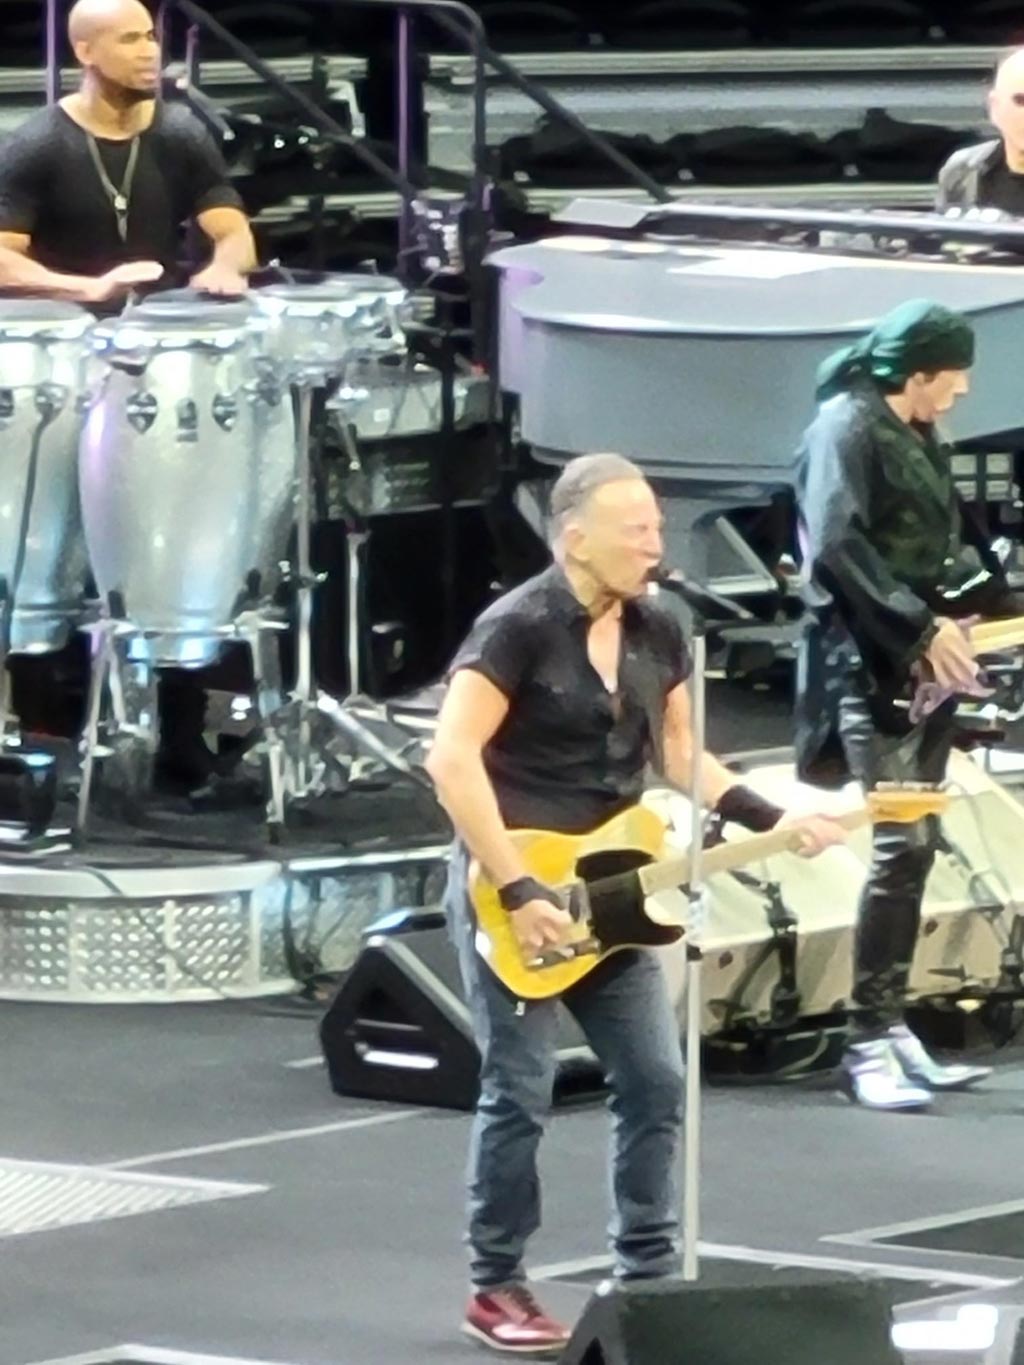 3/16 UCC & Bruce in Philly